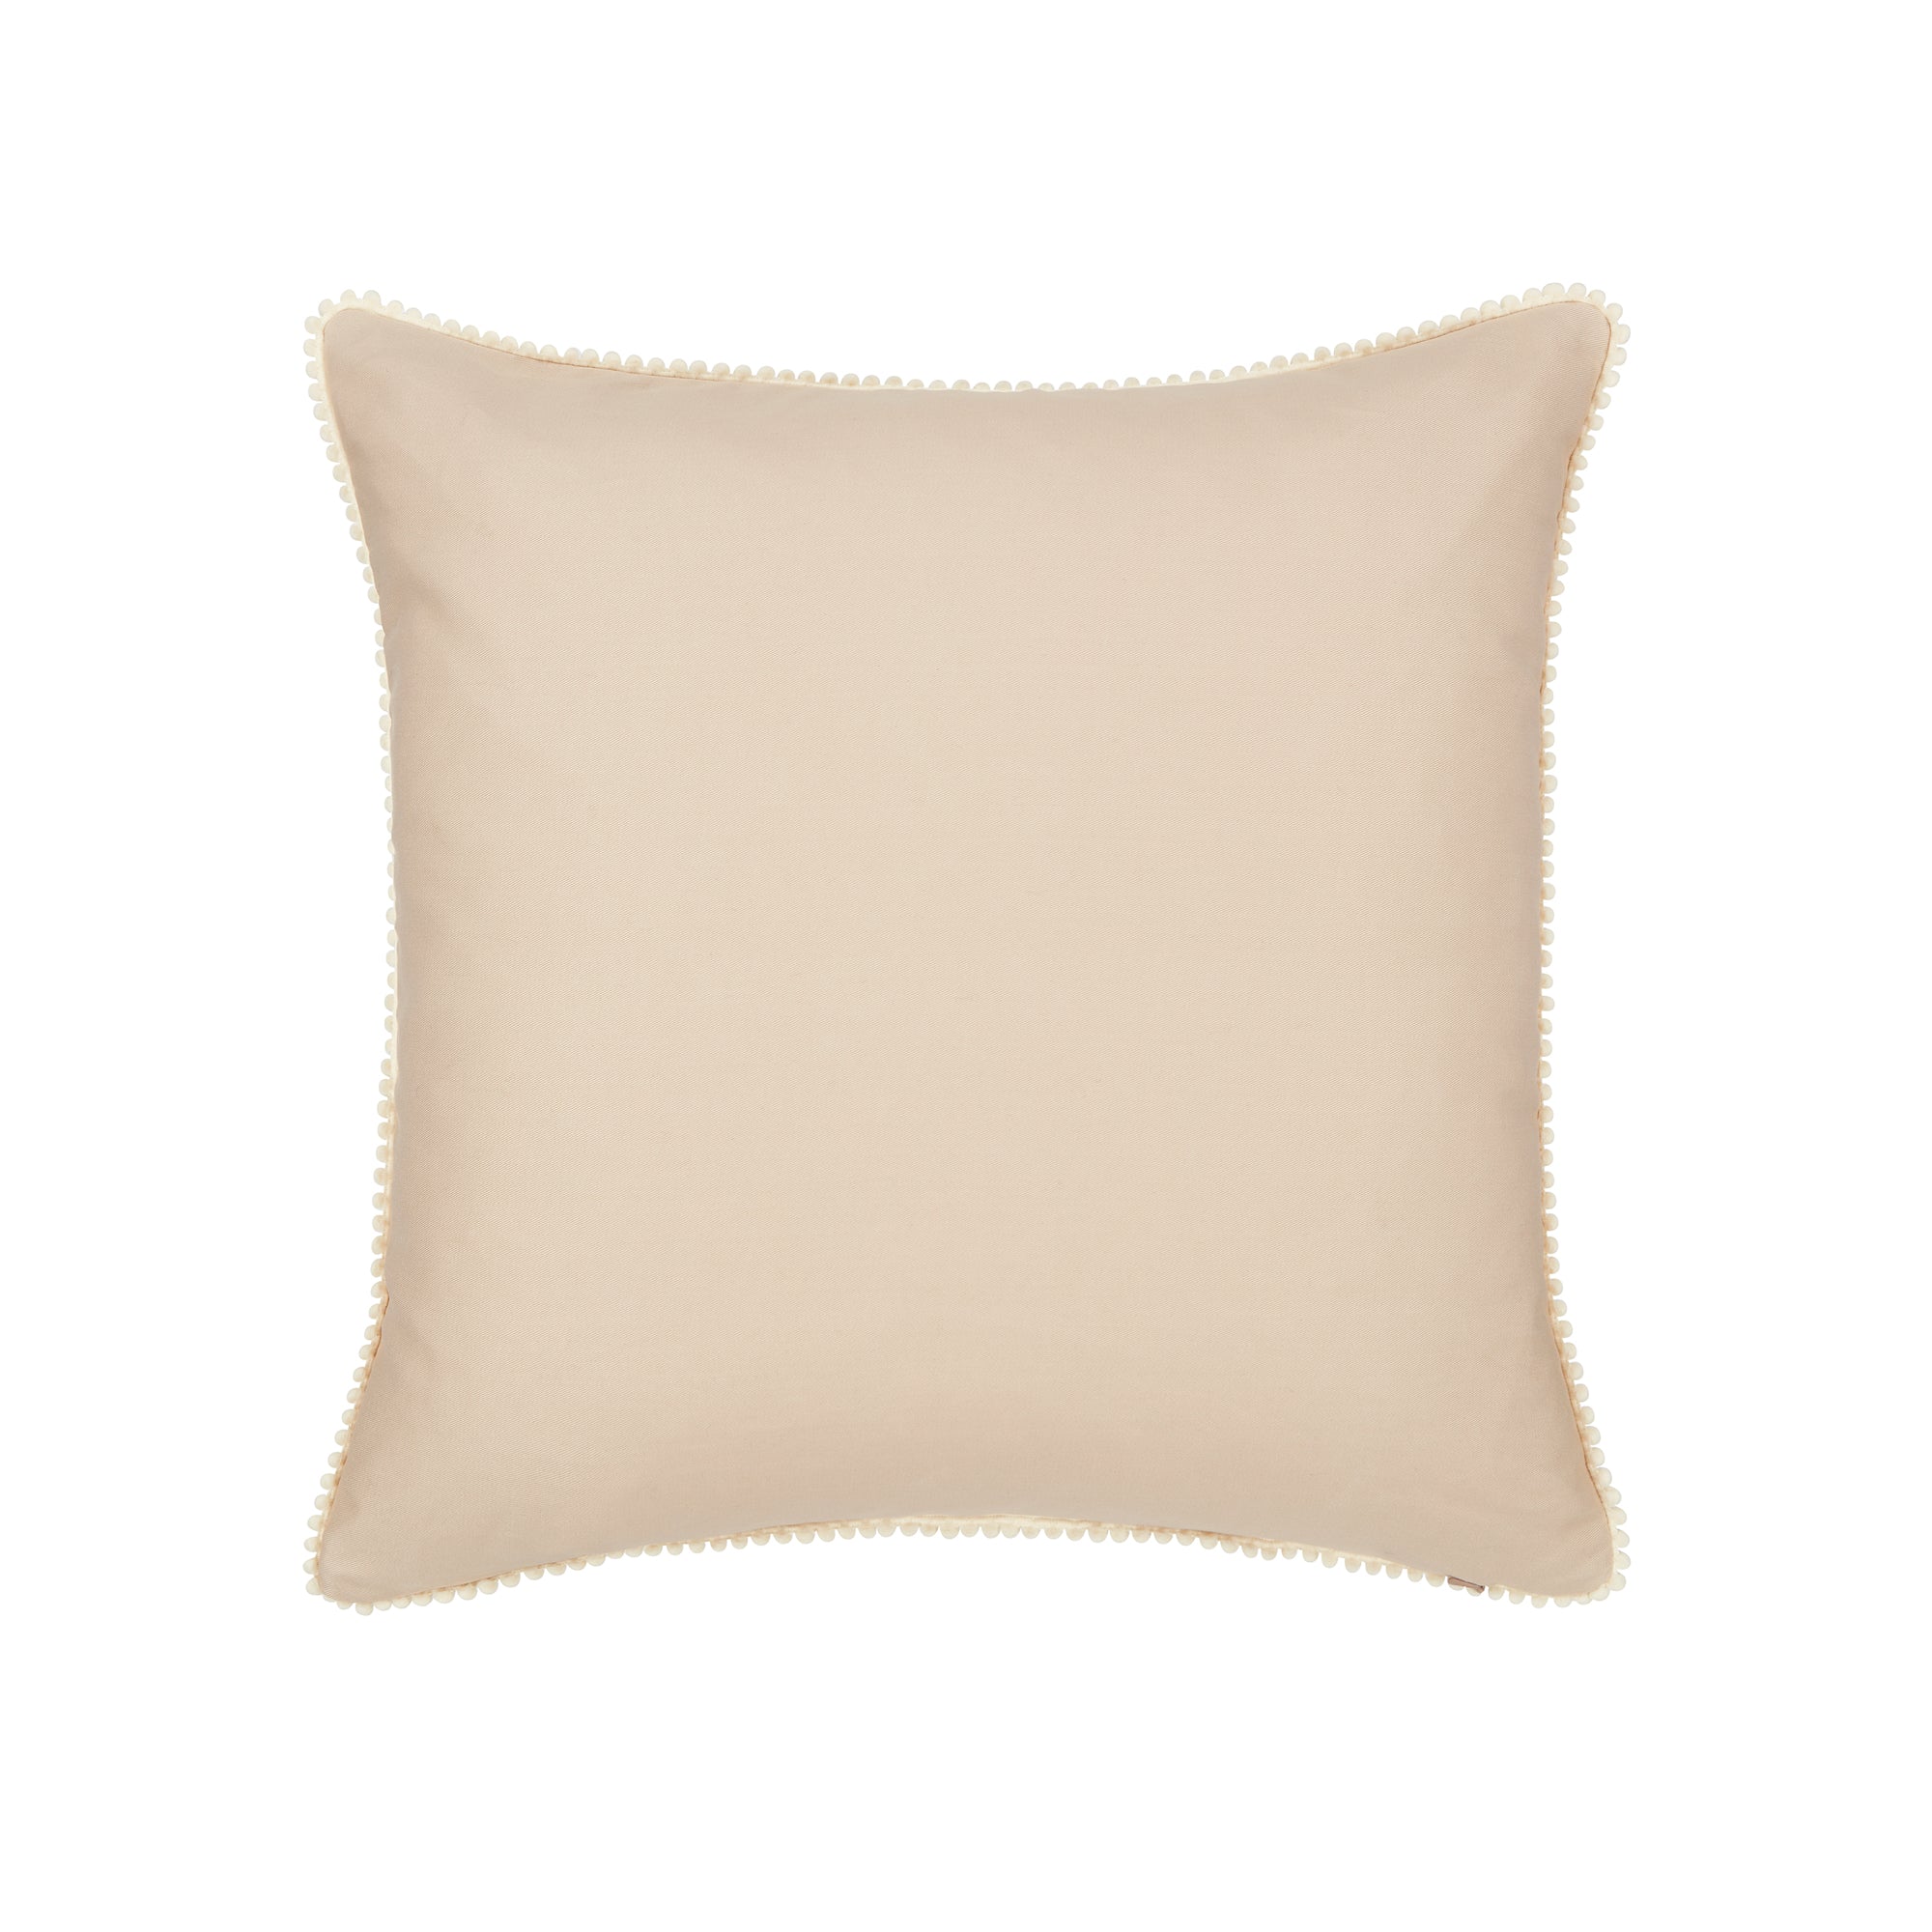 PINK AND CREAM SQUARE CUSHION